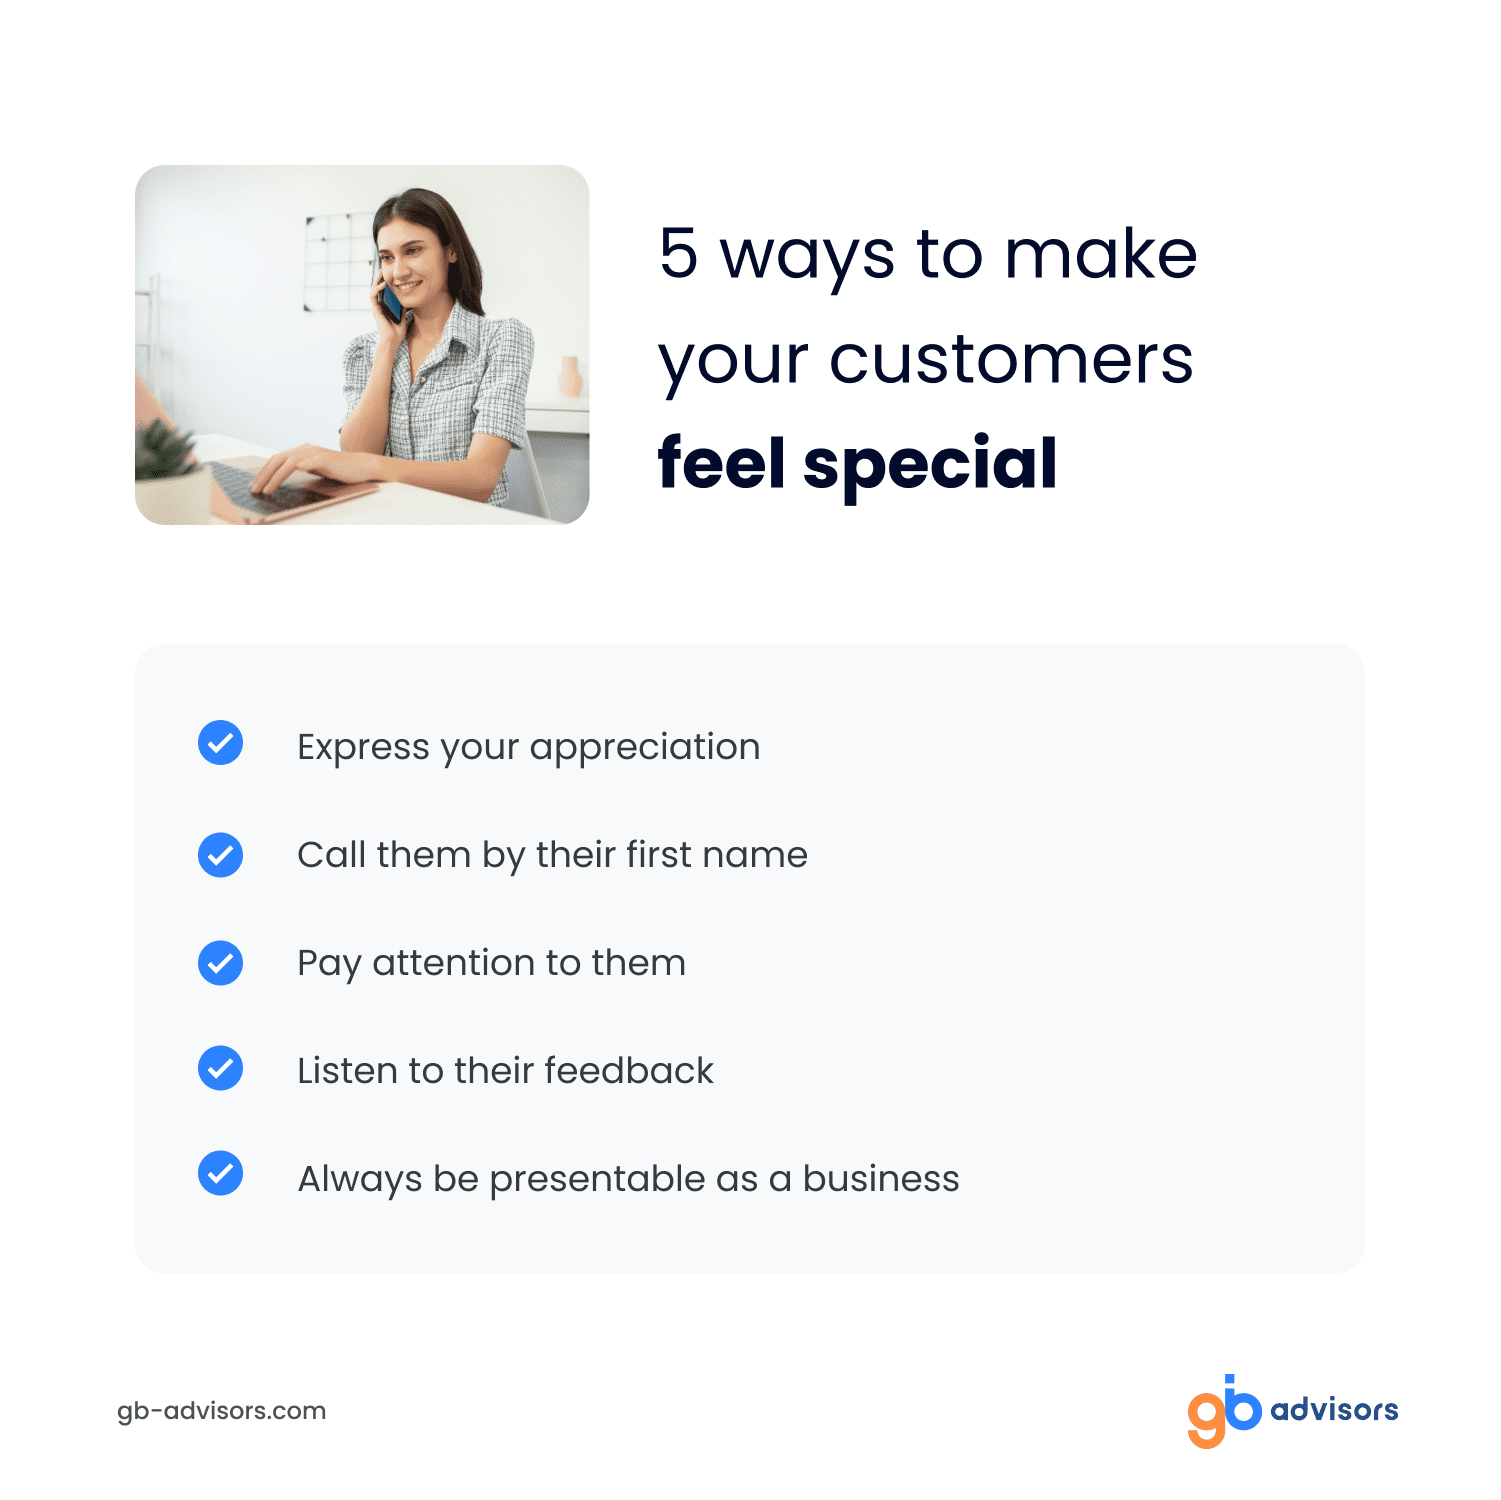 5 ways to make your customers feel special